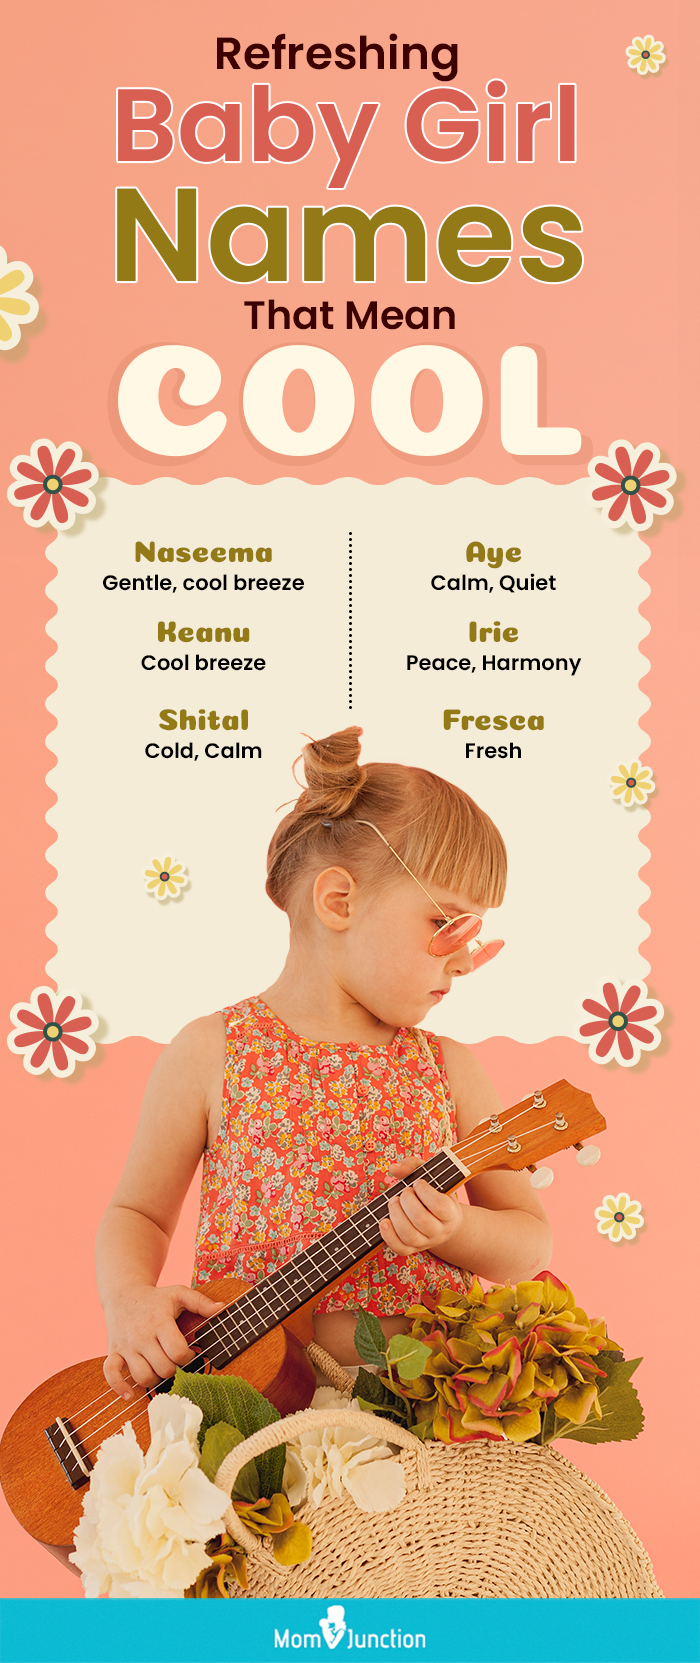 refreshing baby girl names that mean cool (infographic)